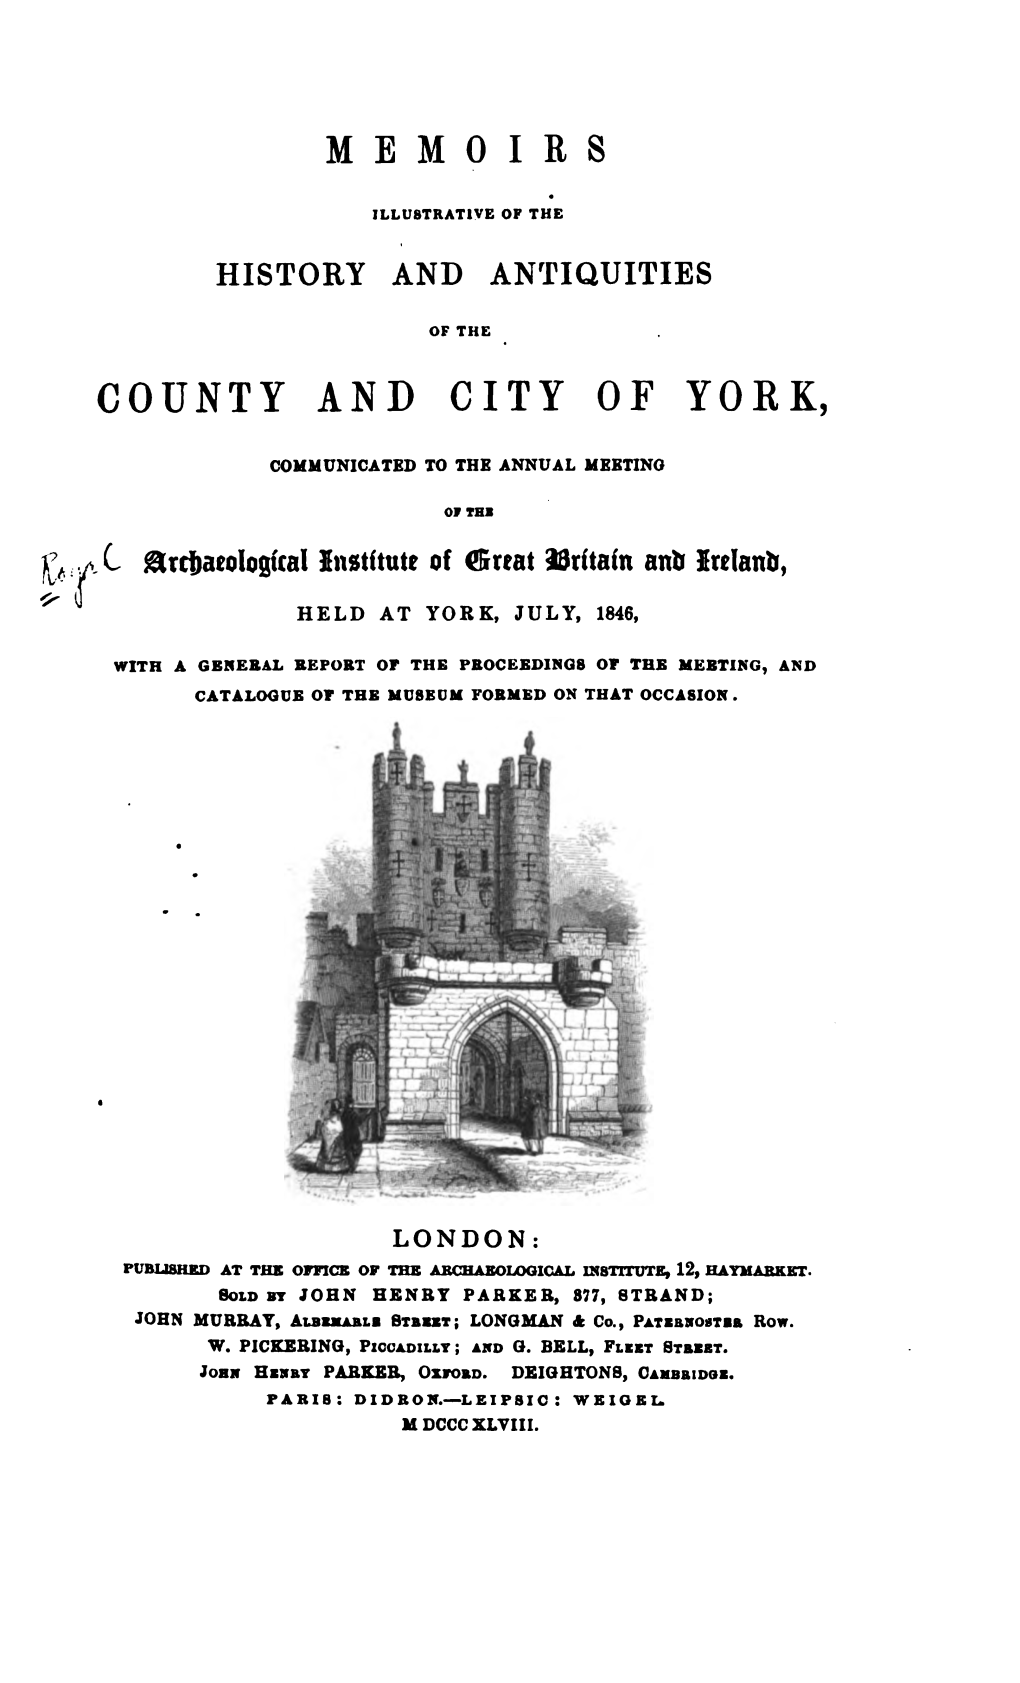 MEMOIRS ILLUSTRATIVE of the HISTORY and ANTIQUITIES COUNTY and CITY of YORK, COMMUNICATED to the ANNUAL MEETING ^.C Archaeologic